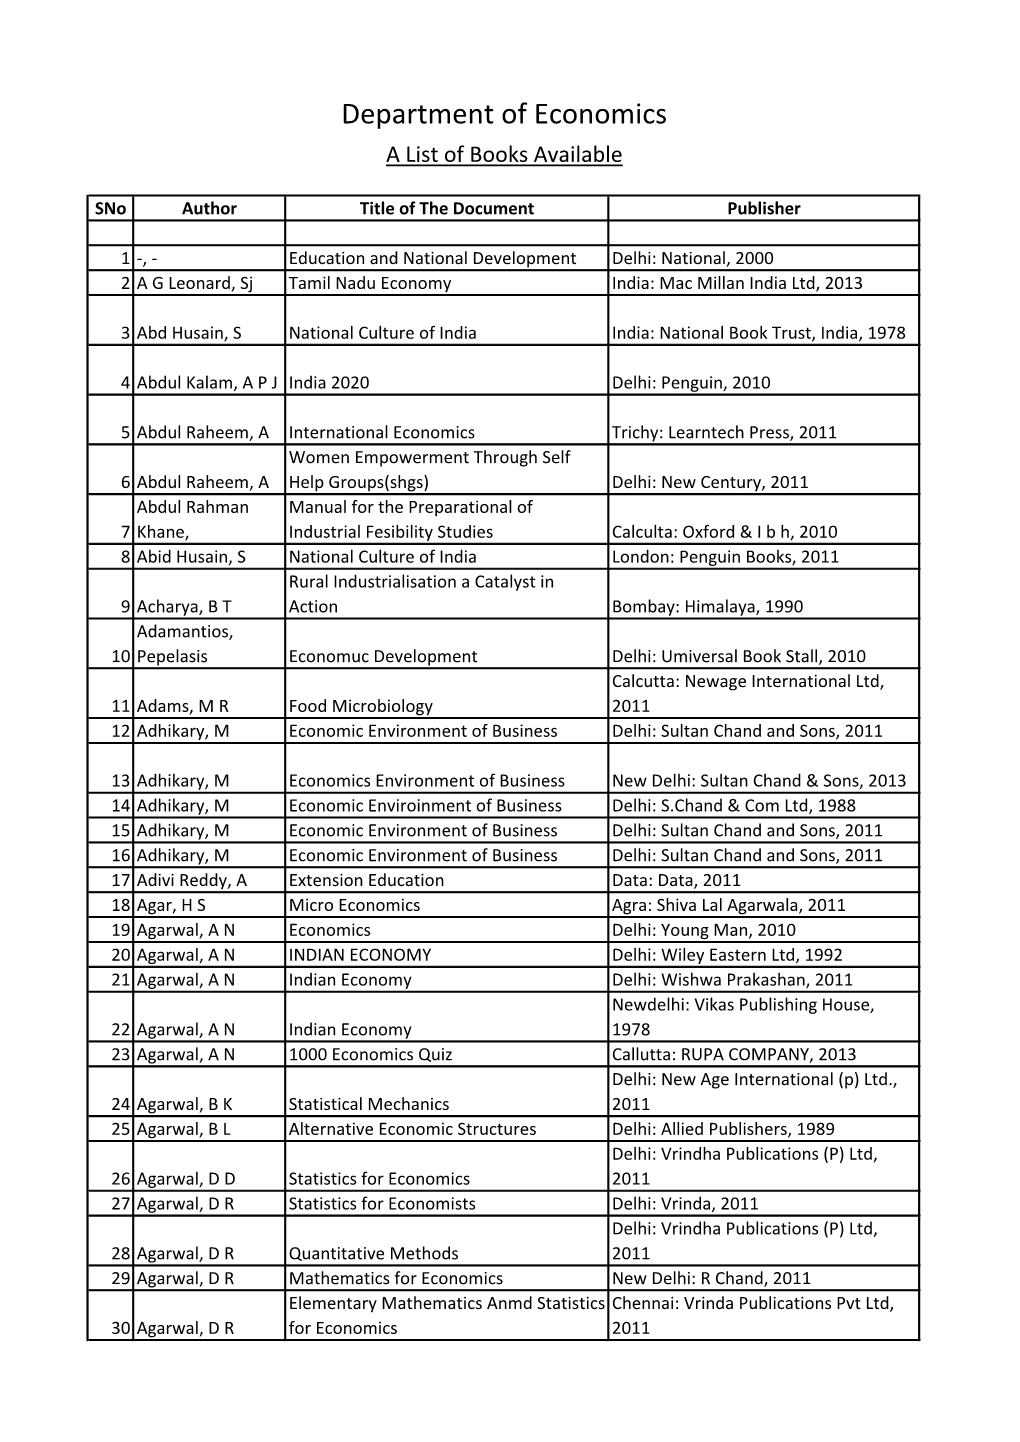 Department of Economics a List of Books Available